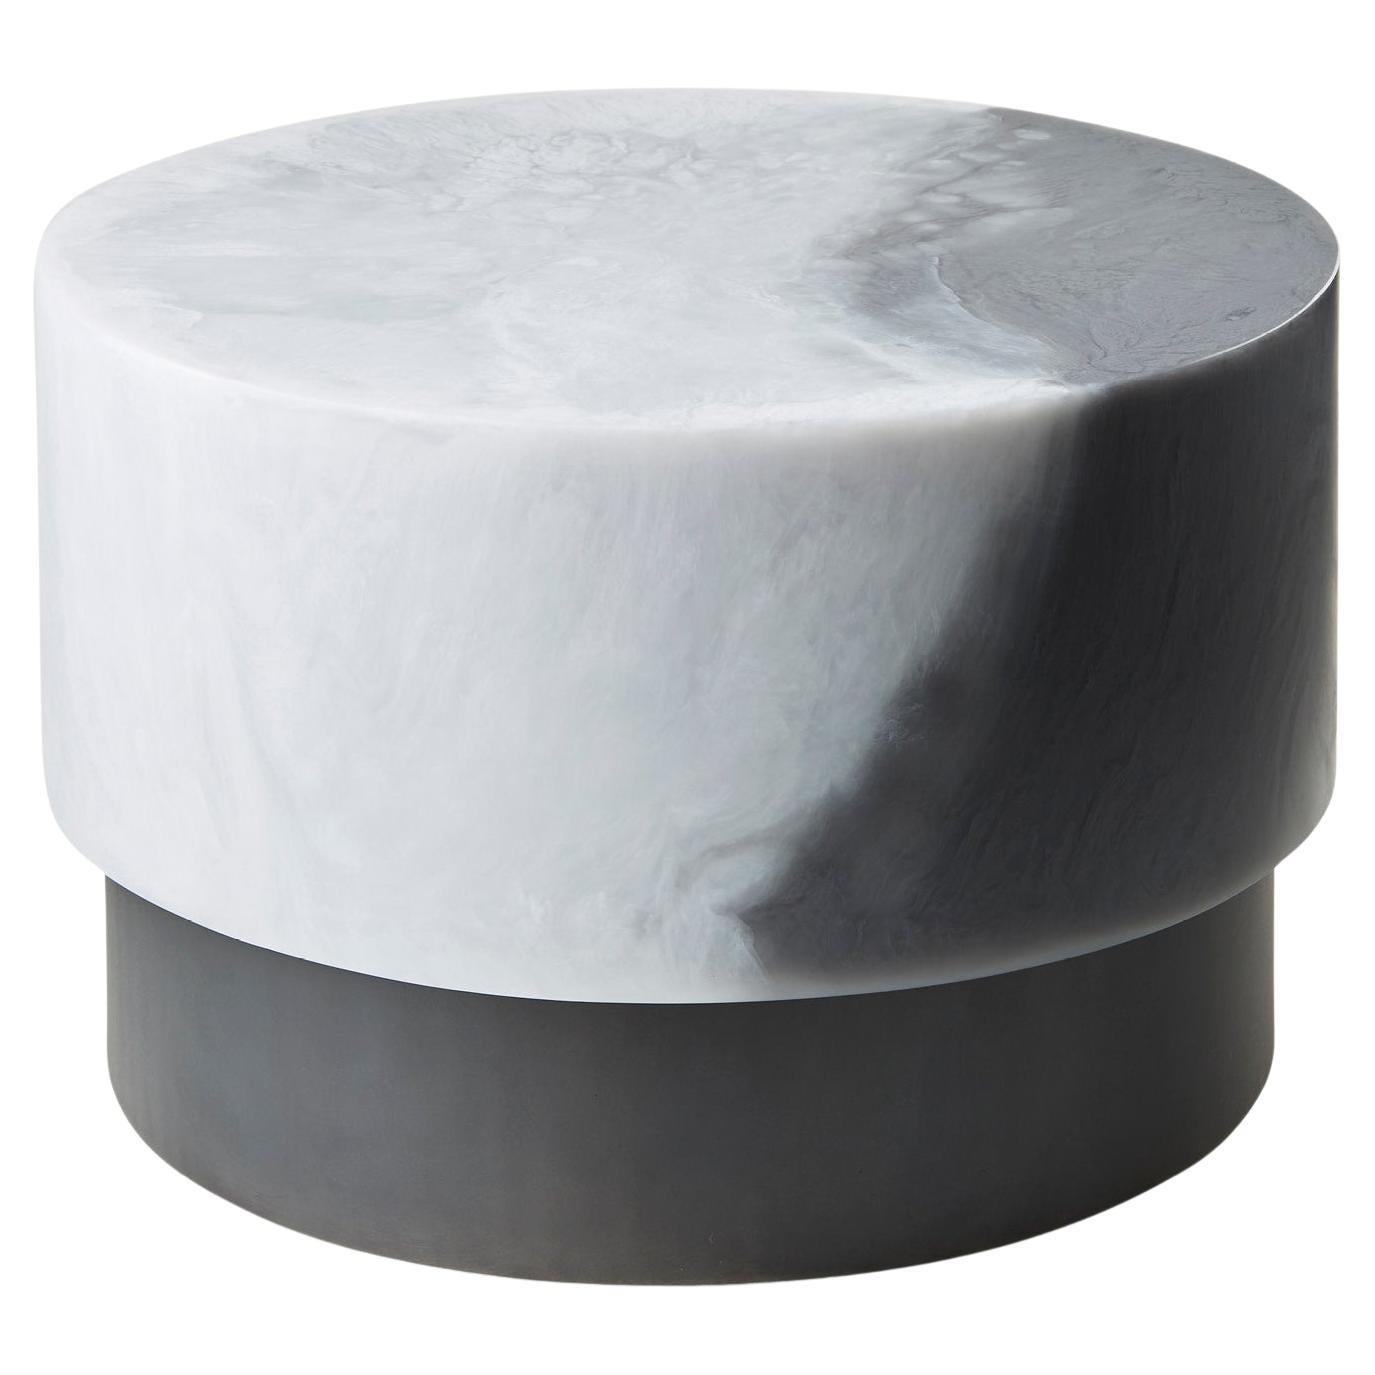 Studio Sturdy Floating Round Table – White Marble & Soft Grey Marble Resin For Sale